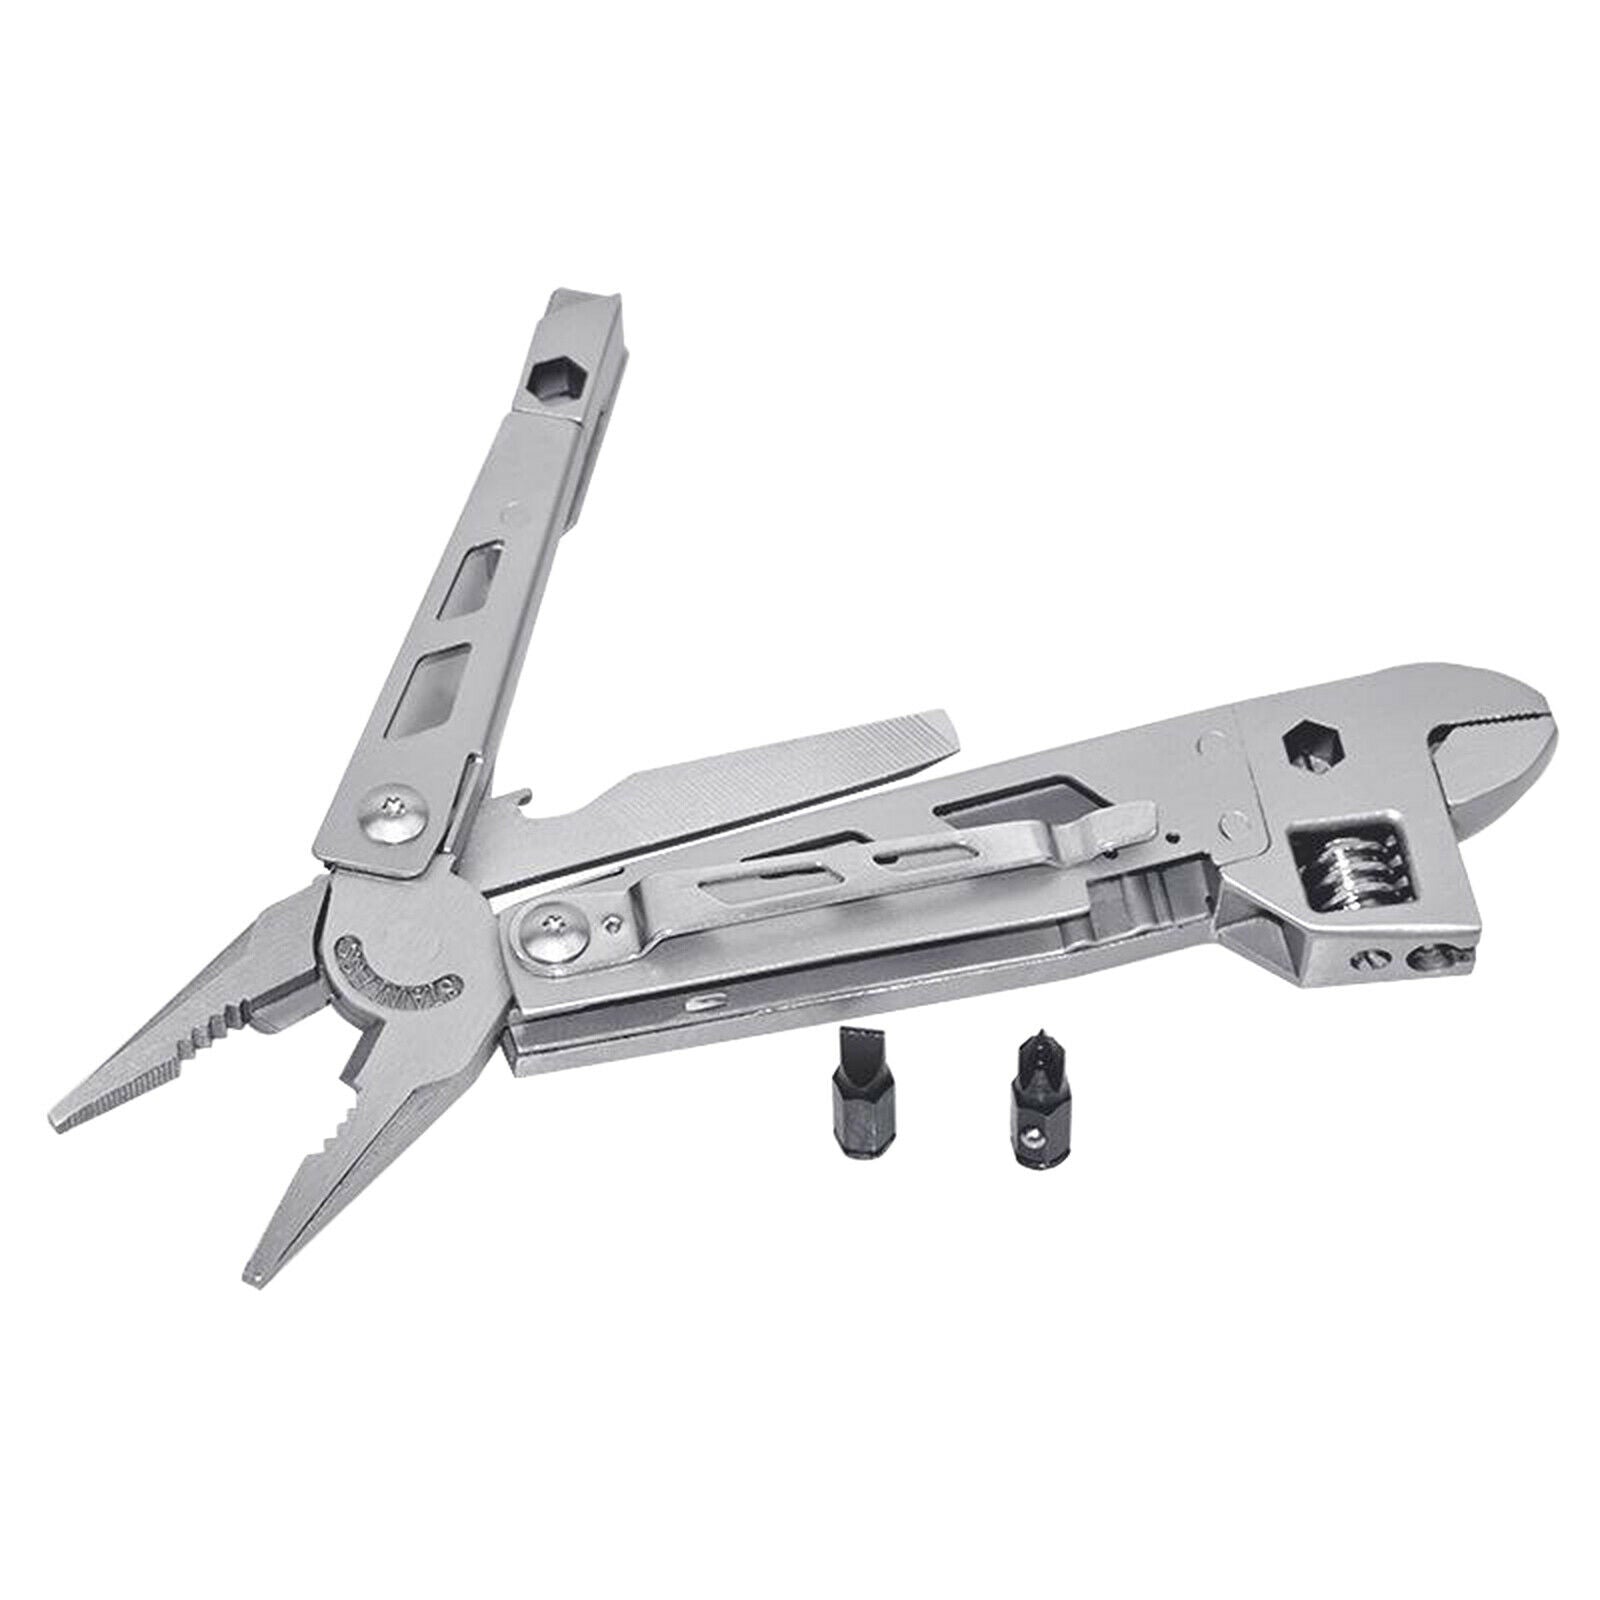 Multitool Pliers Multi-tool  Plier Easy And Convenient to Use Gifts for Dad